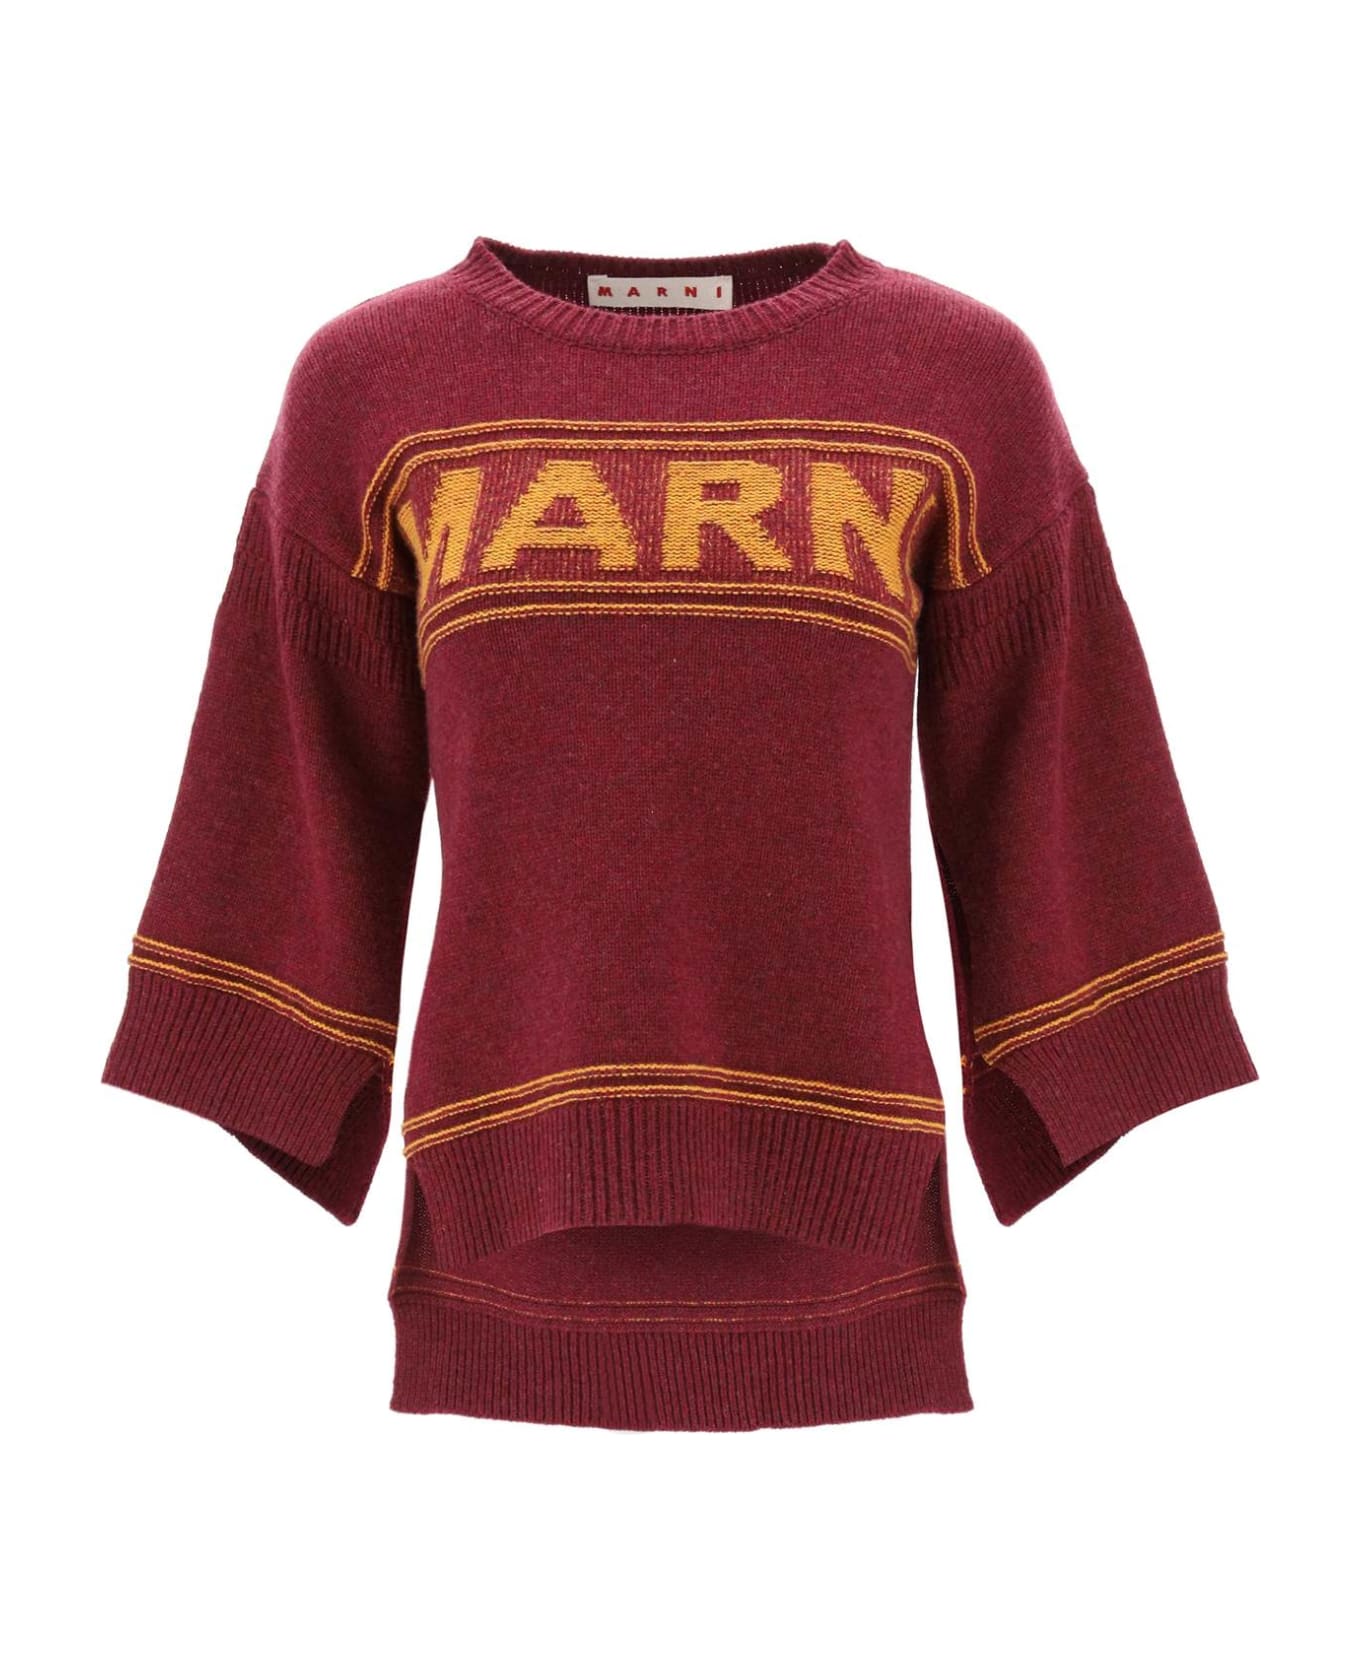 Marni Sweater In Jacquard Knit With Logo - RUBY (Red) ニットウェア